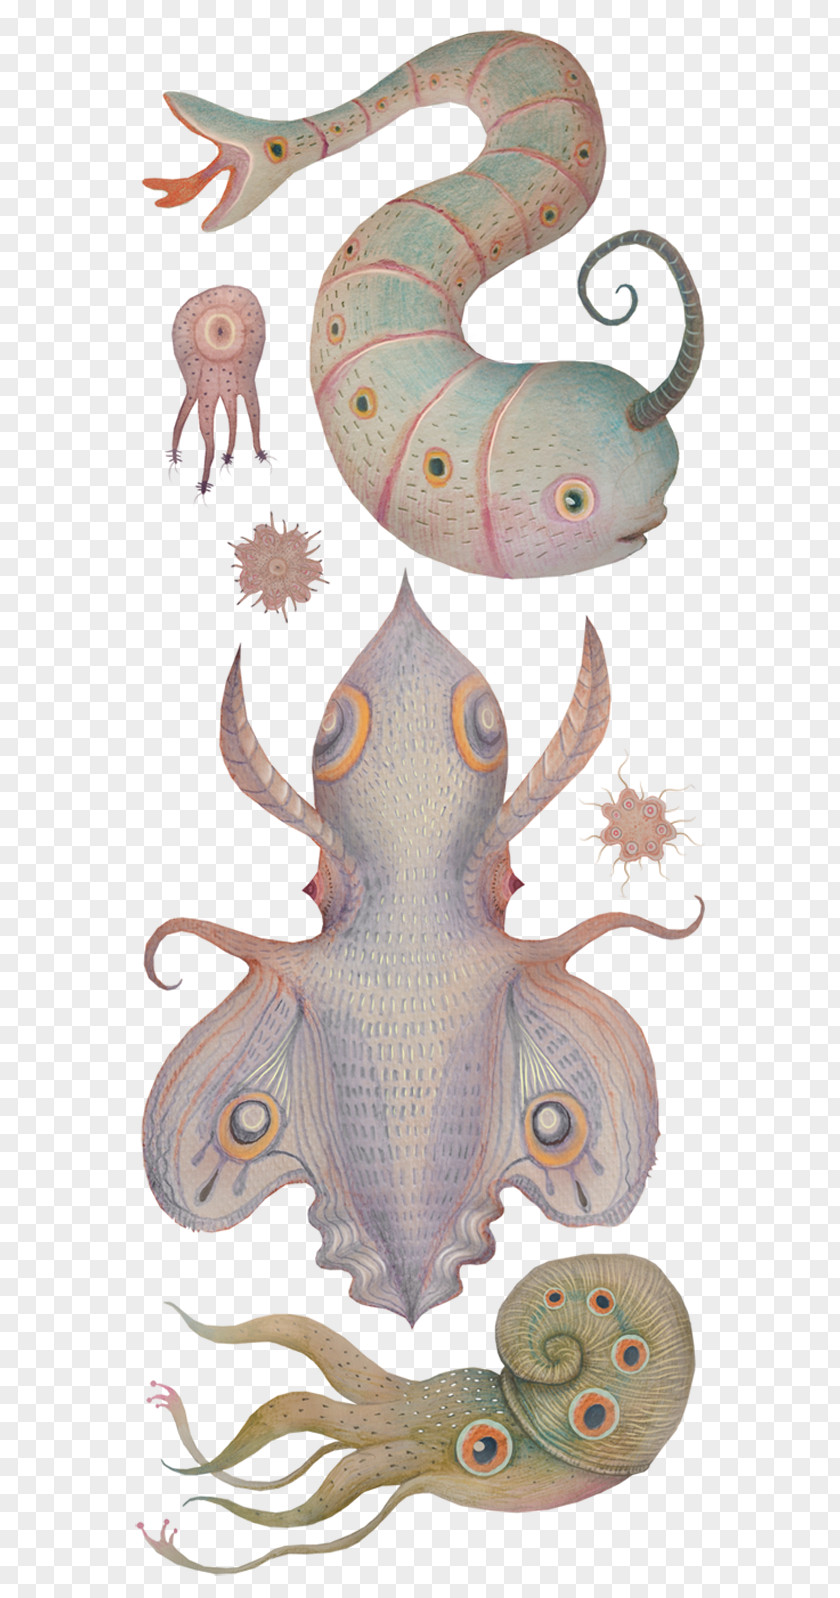 Nature Sea Animals Marine Microorganisms Octopus Squid Cephalopod Narwhal PNG